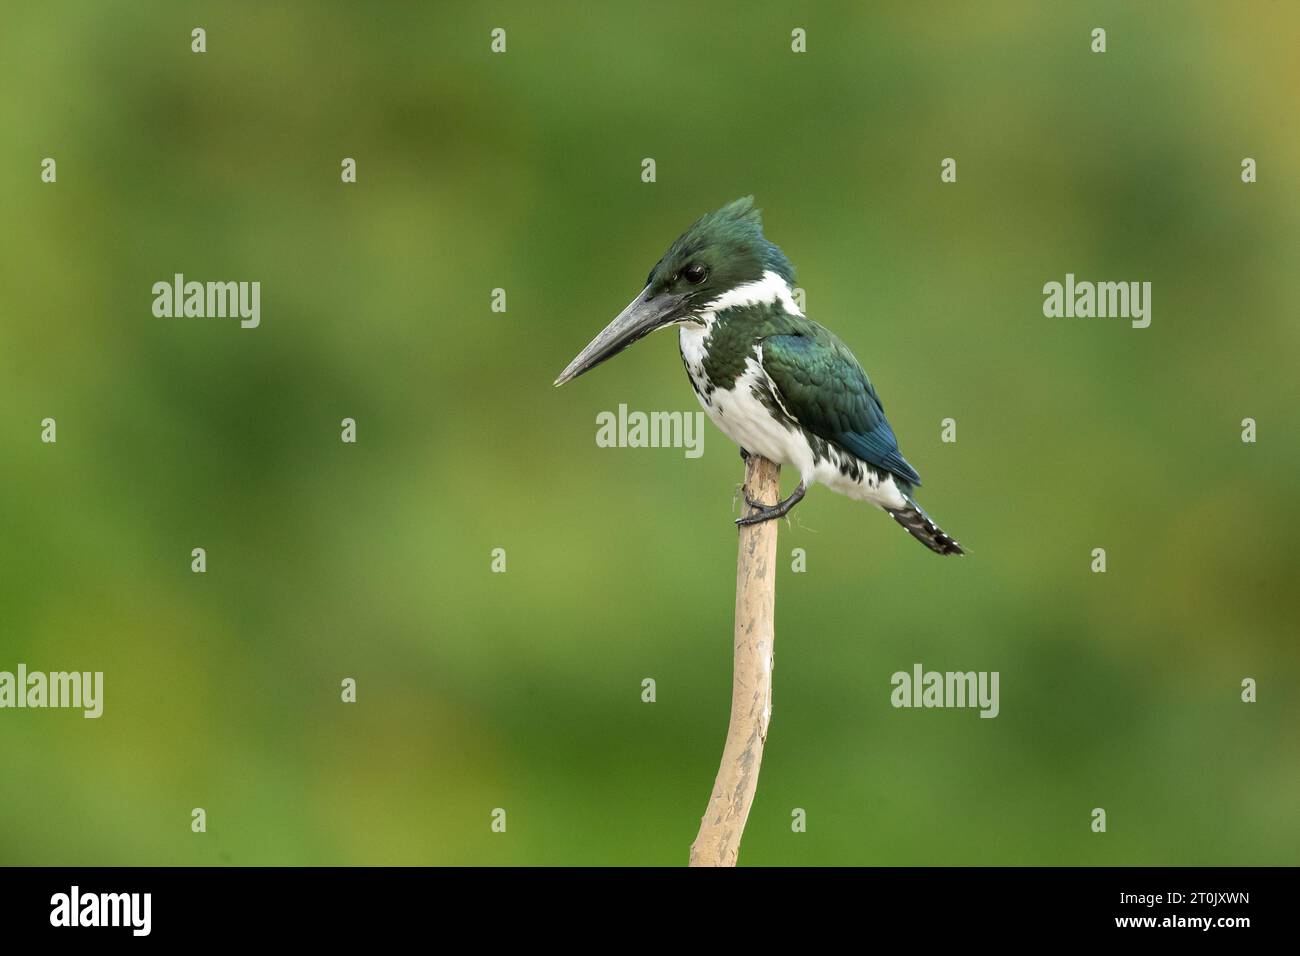 Green kingfisher (Chloroceryle americana) is a species of 'water kingfisher' in the subfamily Cerylinae of the family Alcedinidae. Stock Photo